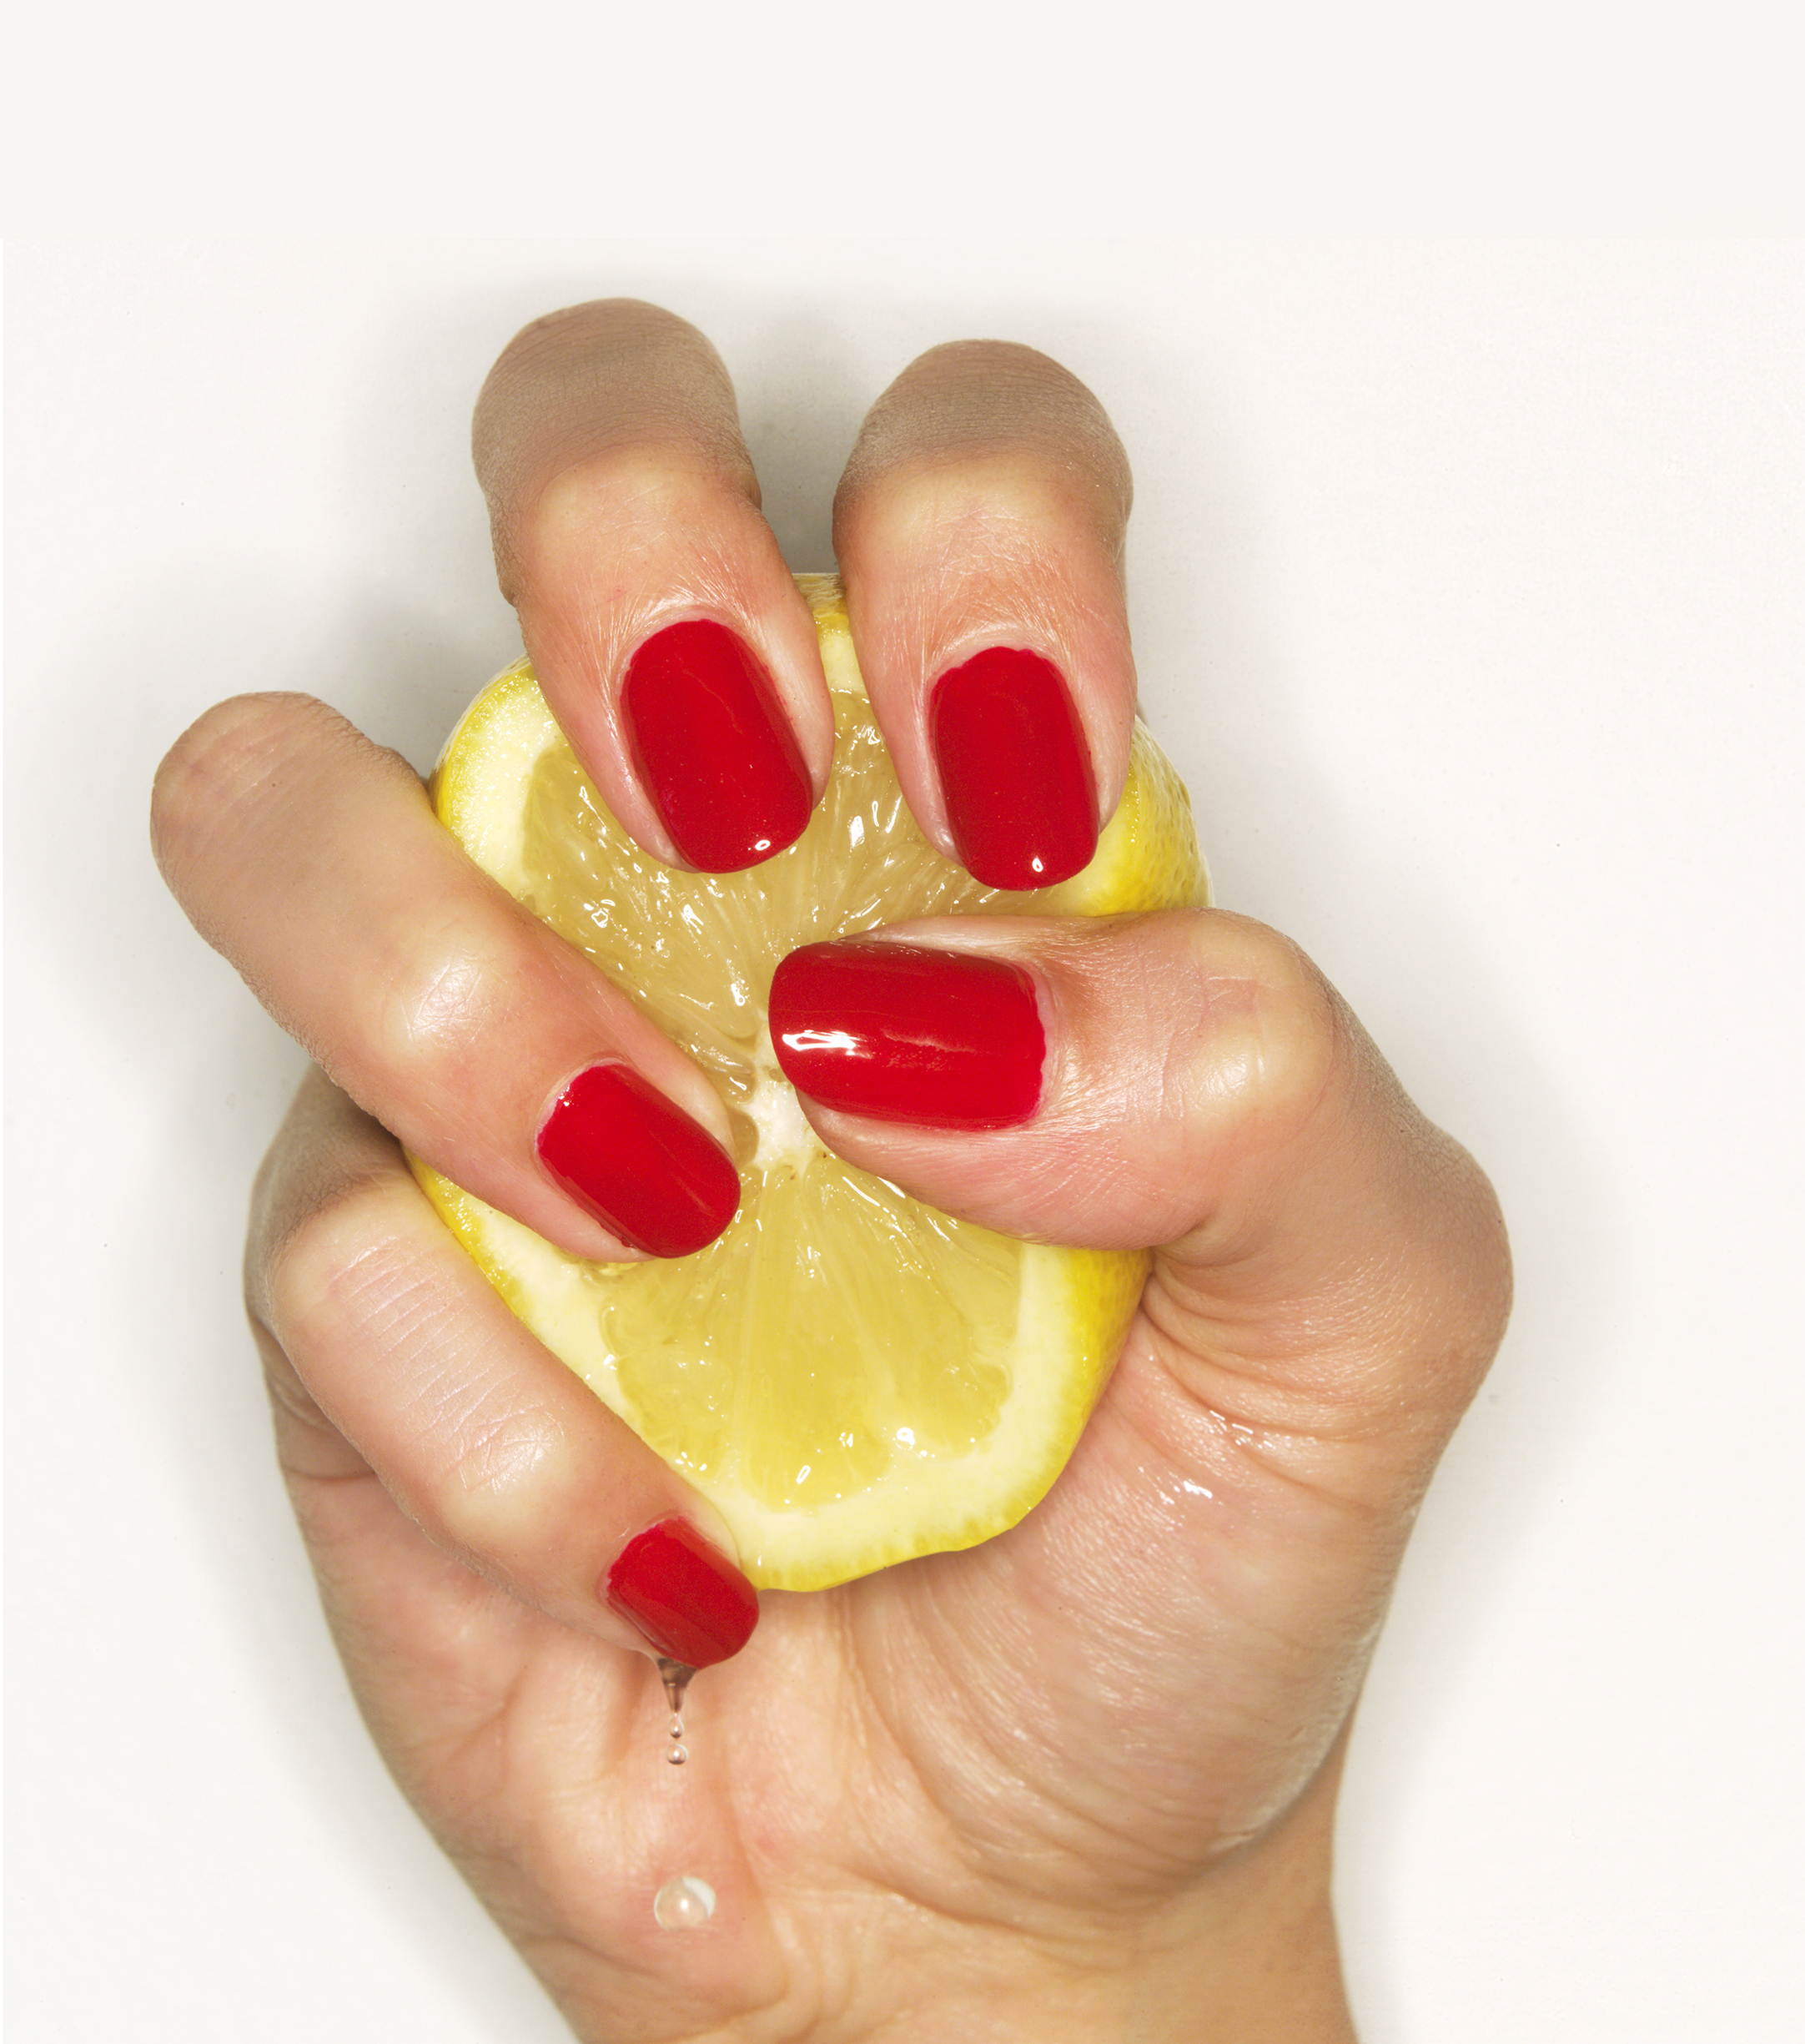 Hand of woman with red nail polish squeezing lemon